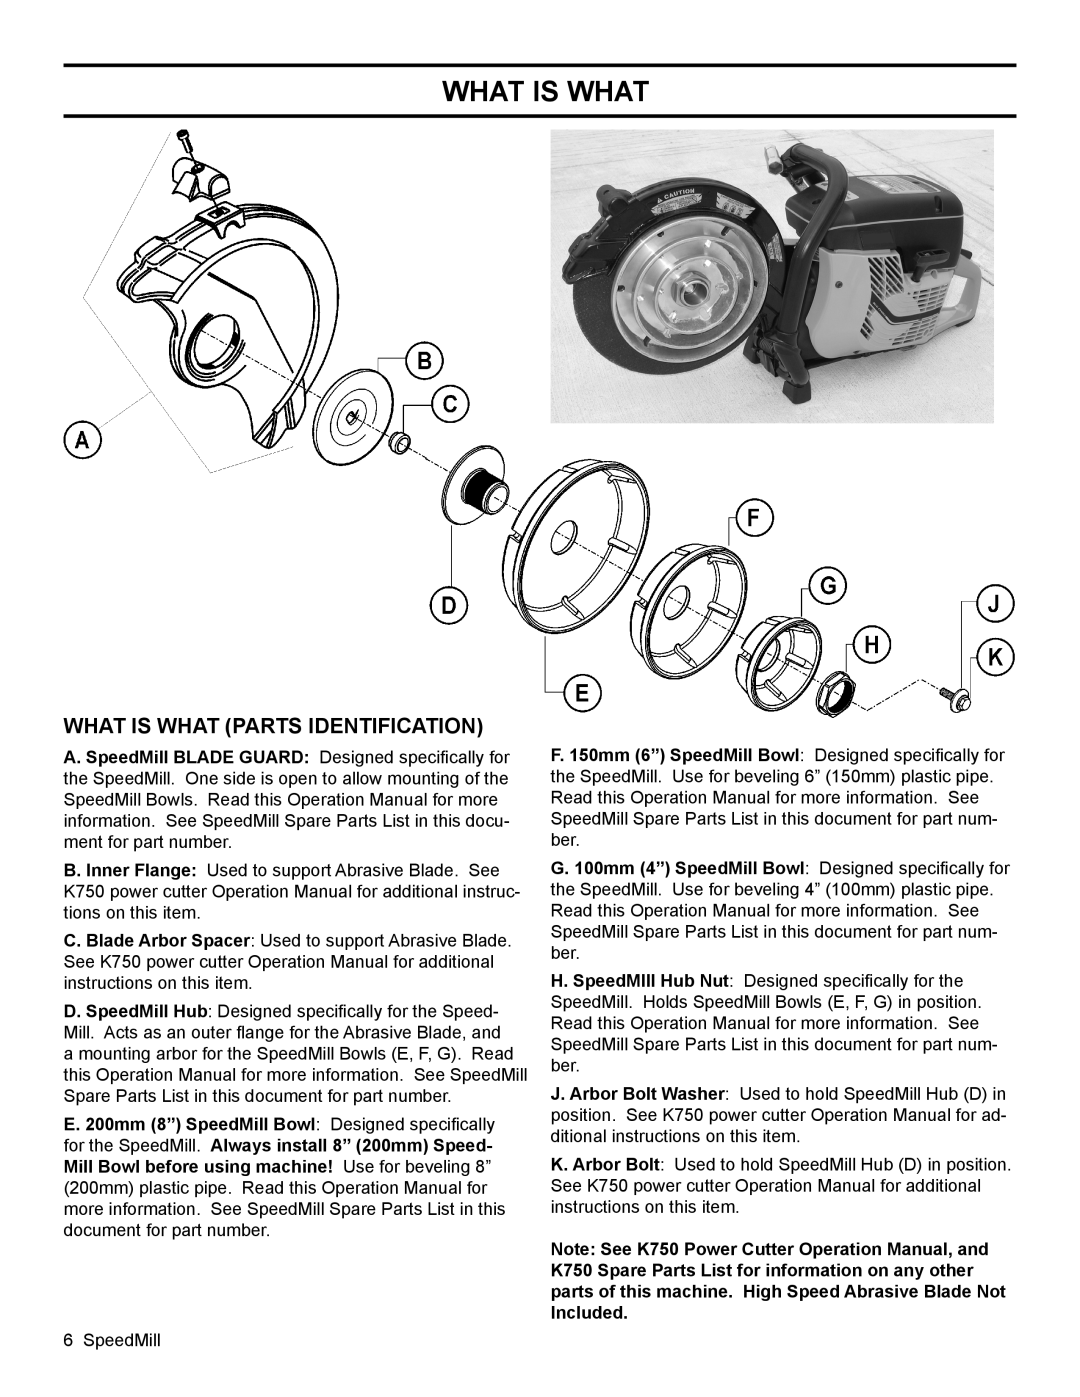 Husqvarna K 750 manual What Is What Parts Identification 